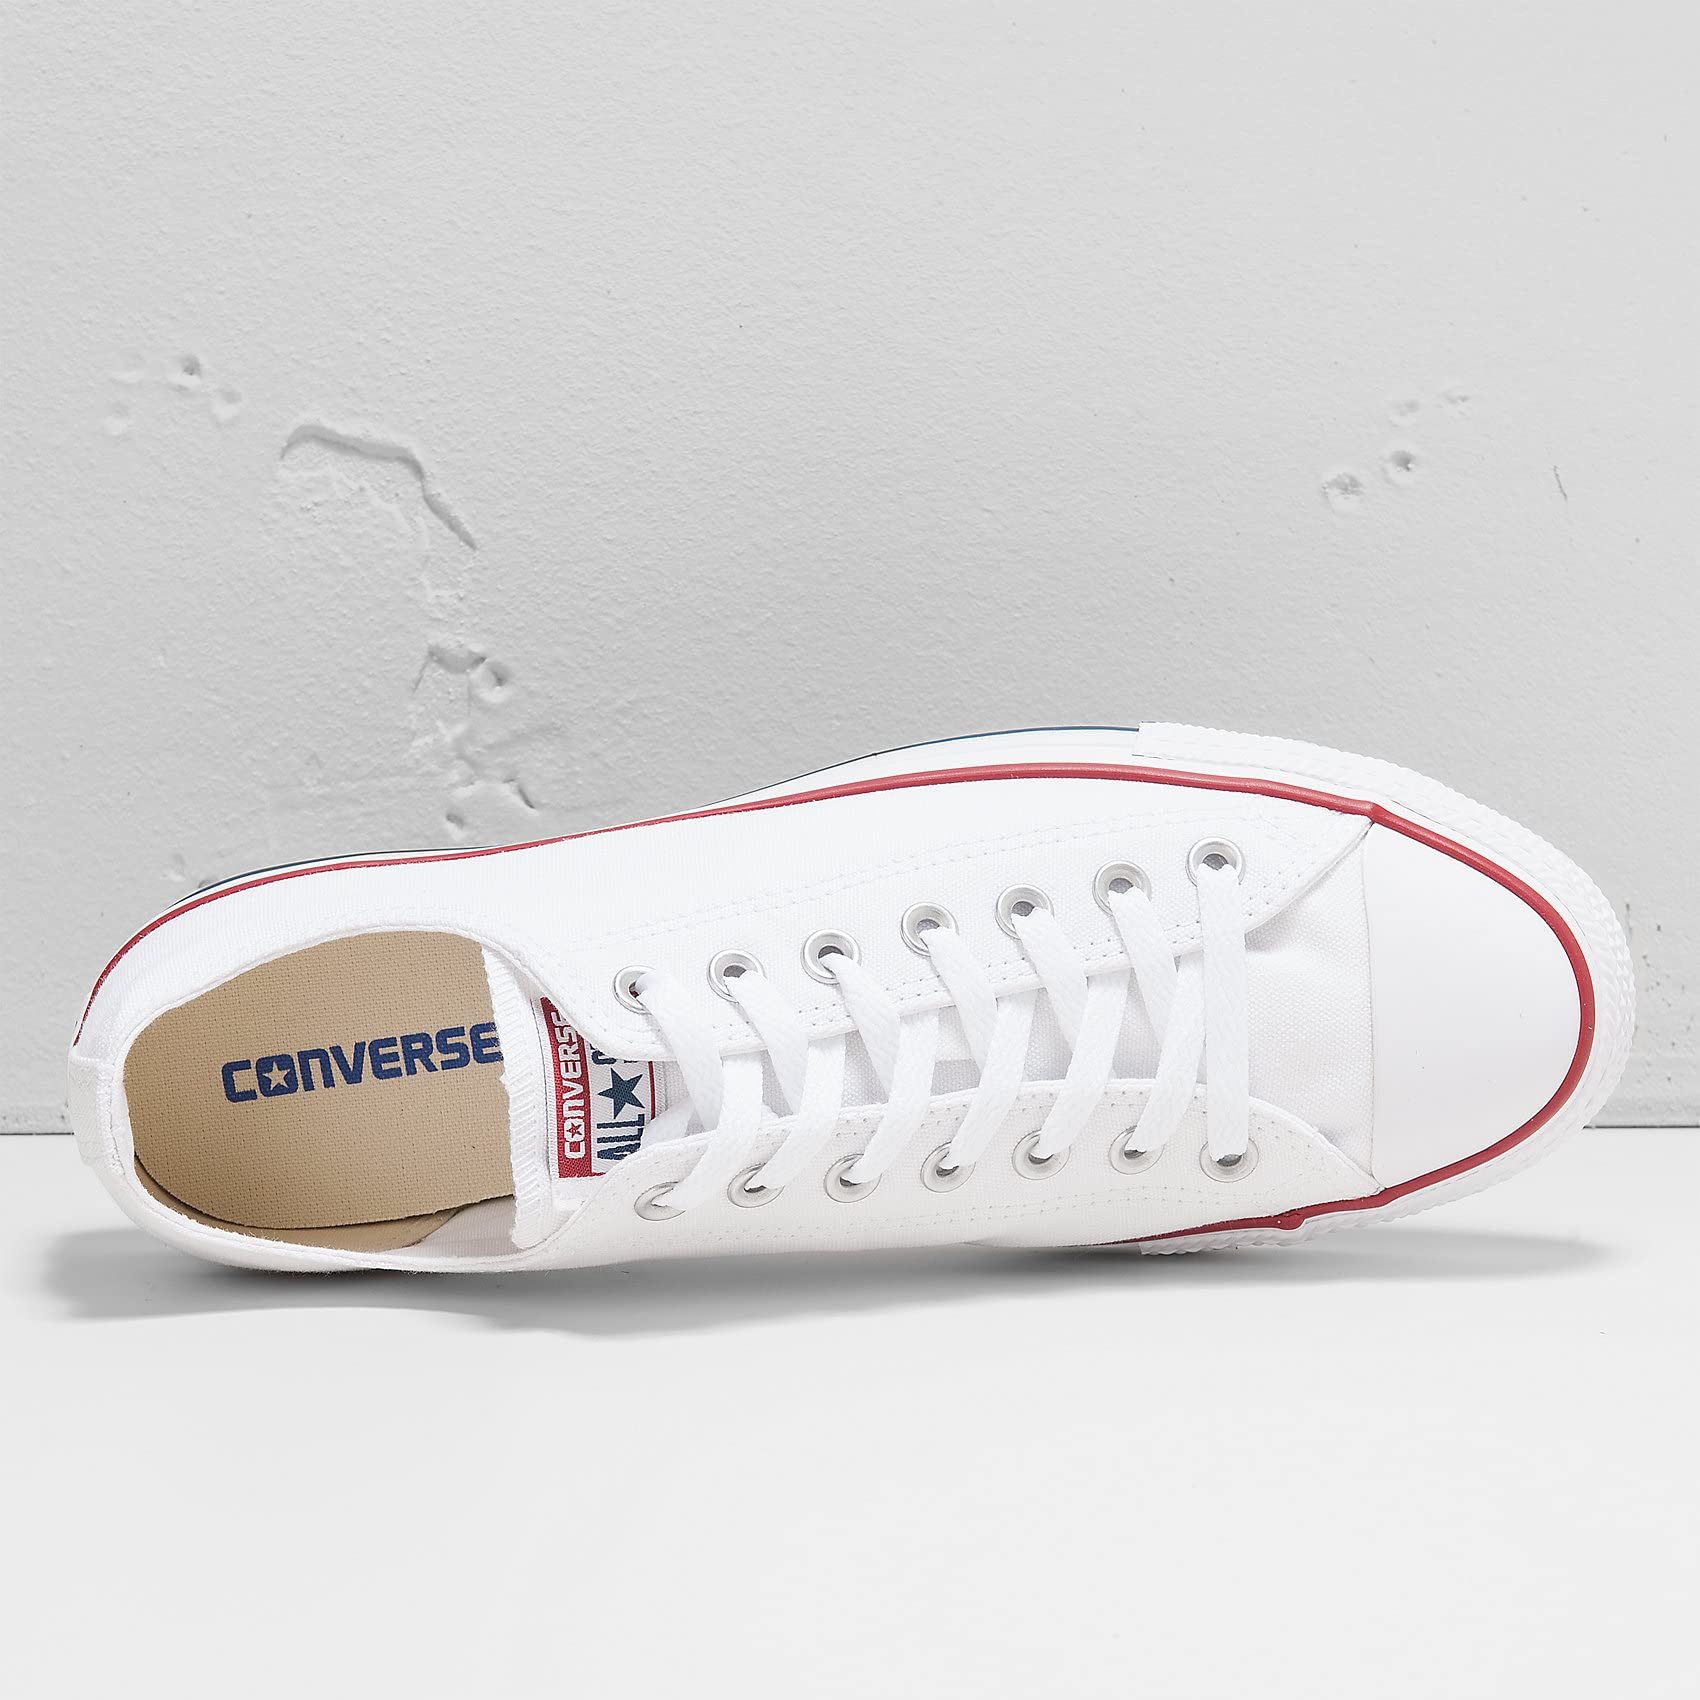 Converse unisex-child Chuck Taylor All Star Low Top Sneaker